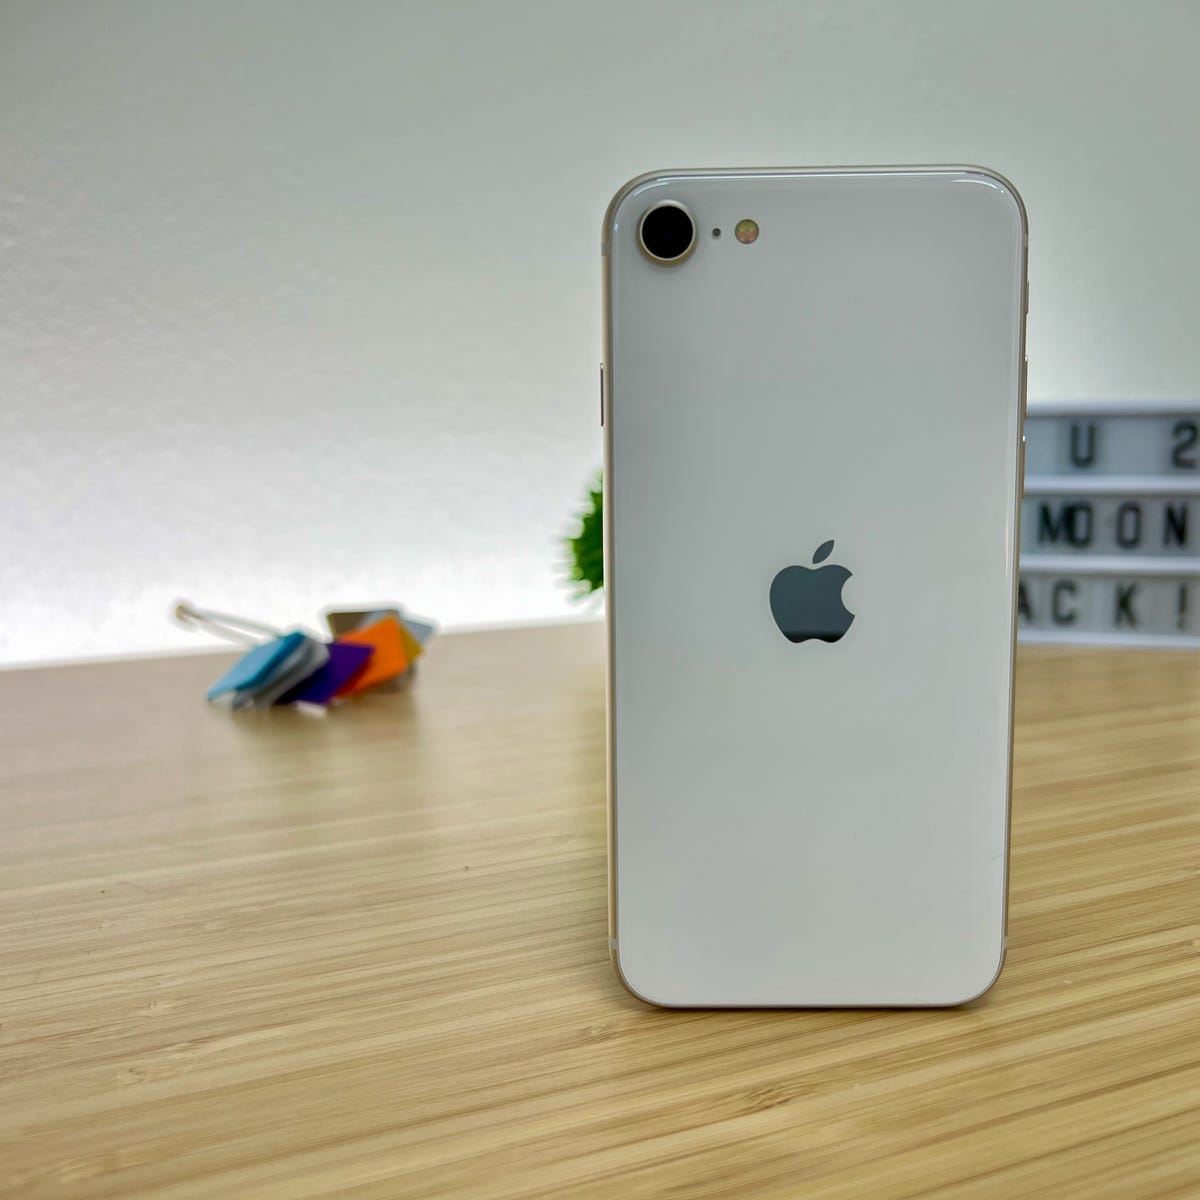 indre det sidste Fuld Apple iPhone SE (2022) review: You simply can't find a better phone at this  price | ZDNET